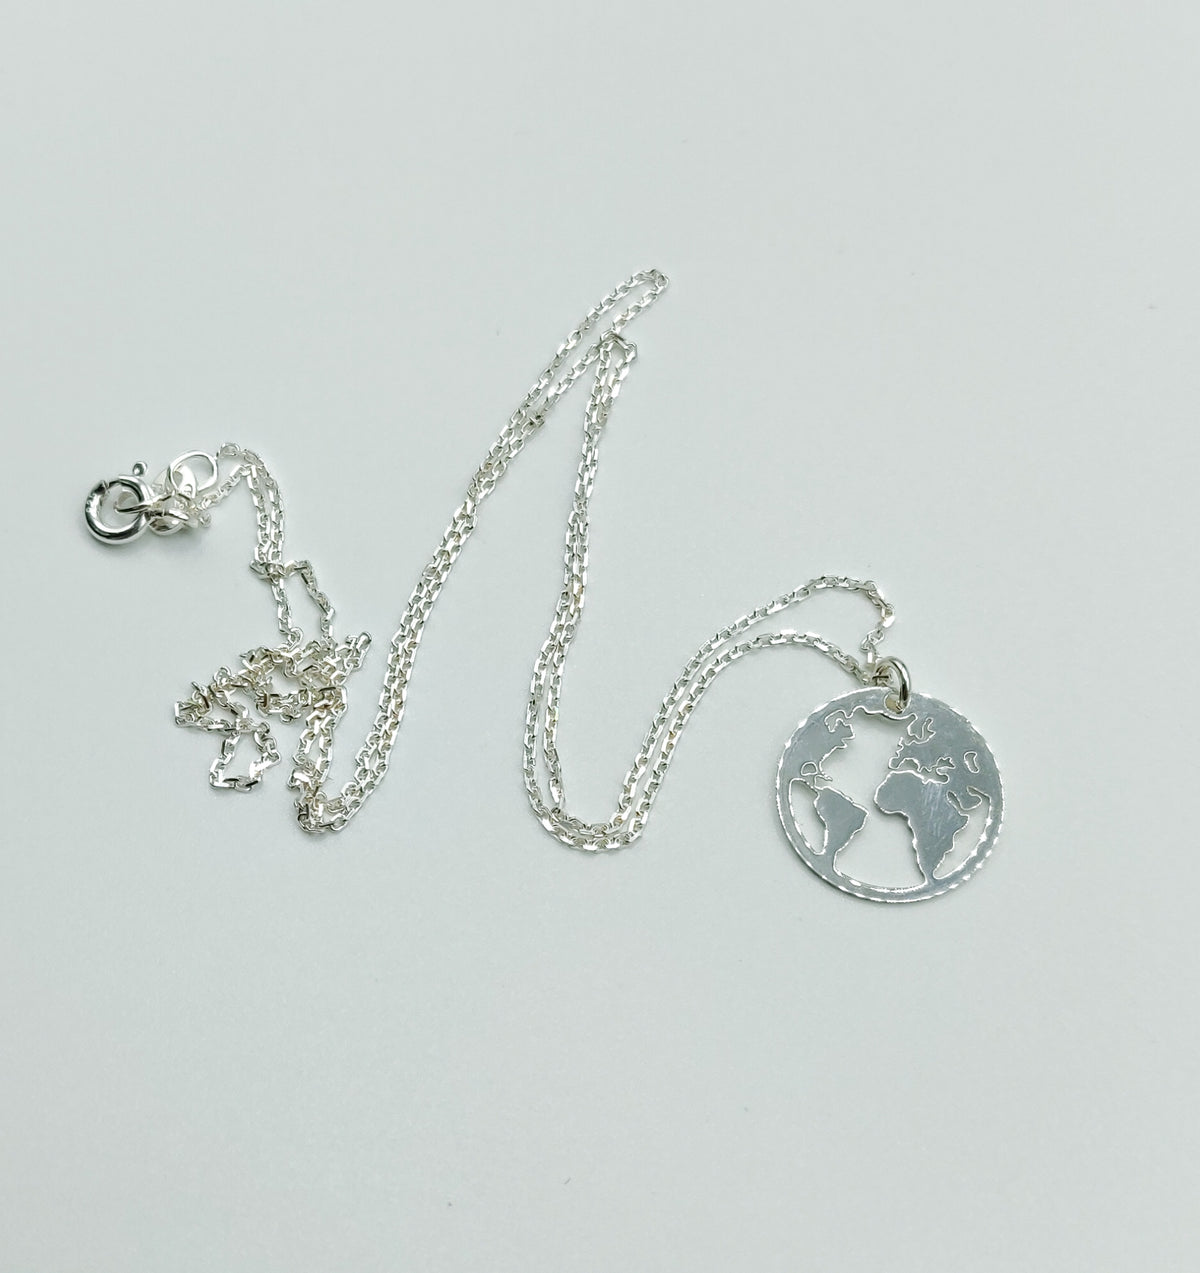 World silver necklace - sterling silver 925